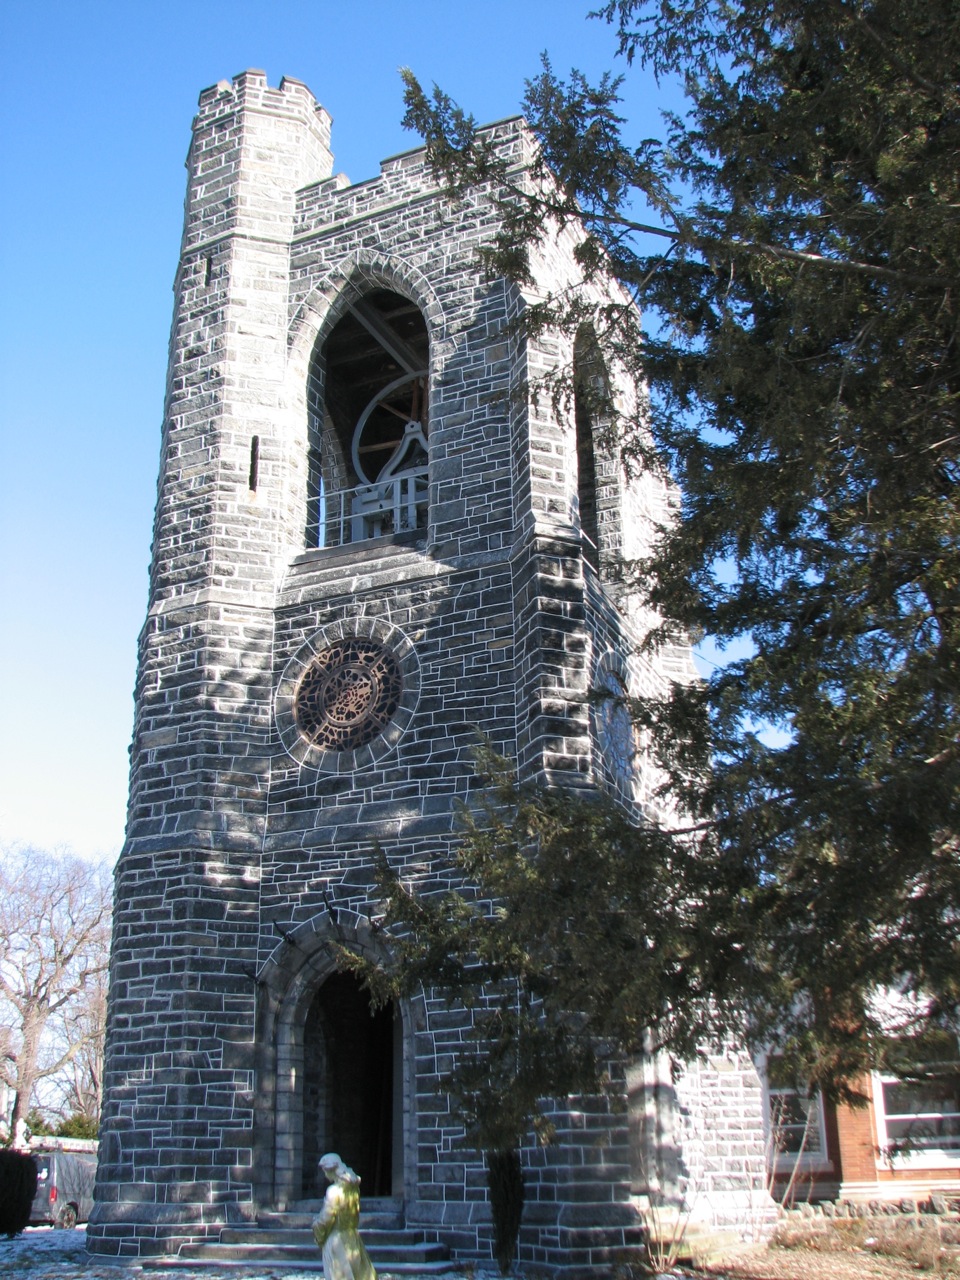 West Laurel Hill’s Gothic Revvial bell tower was designed by architects Walter Cope and John Stewardson.